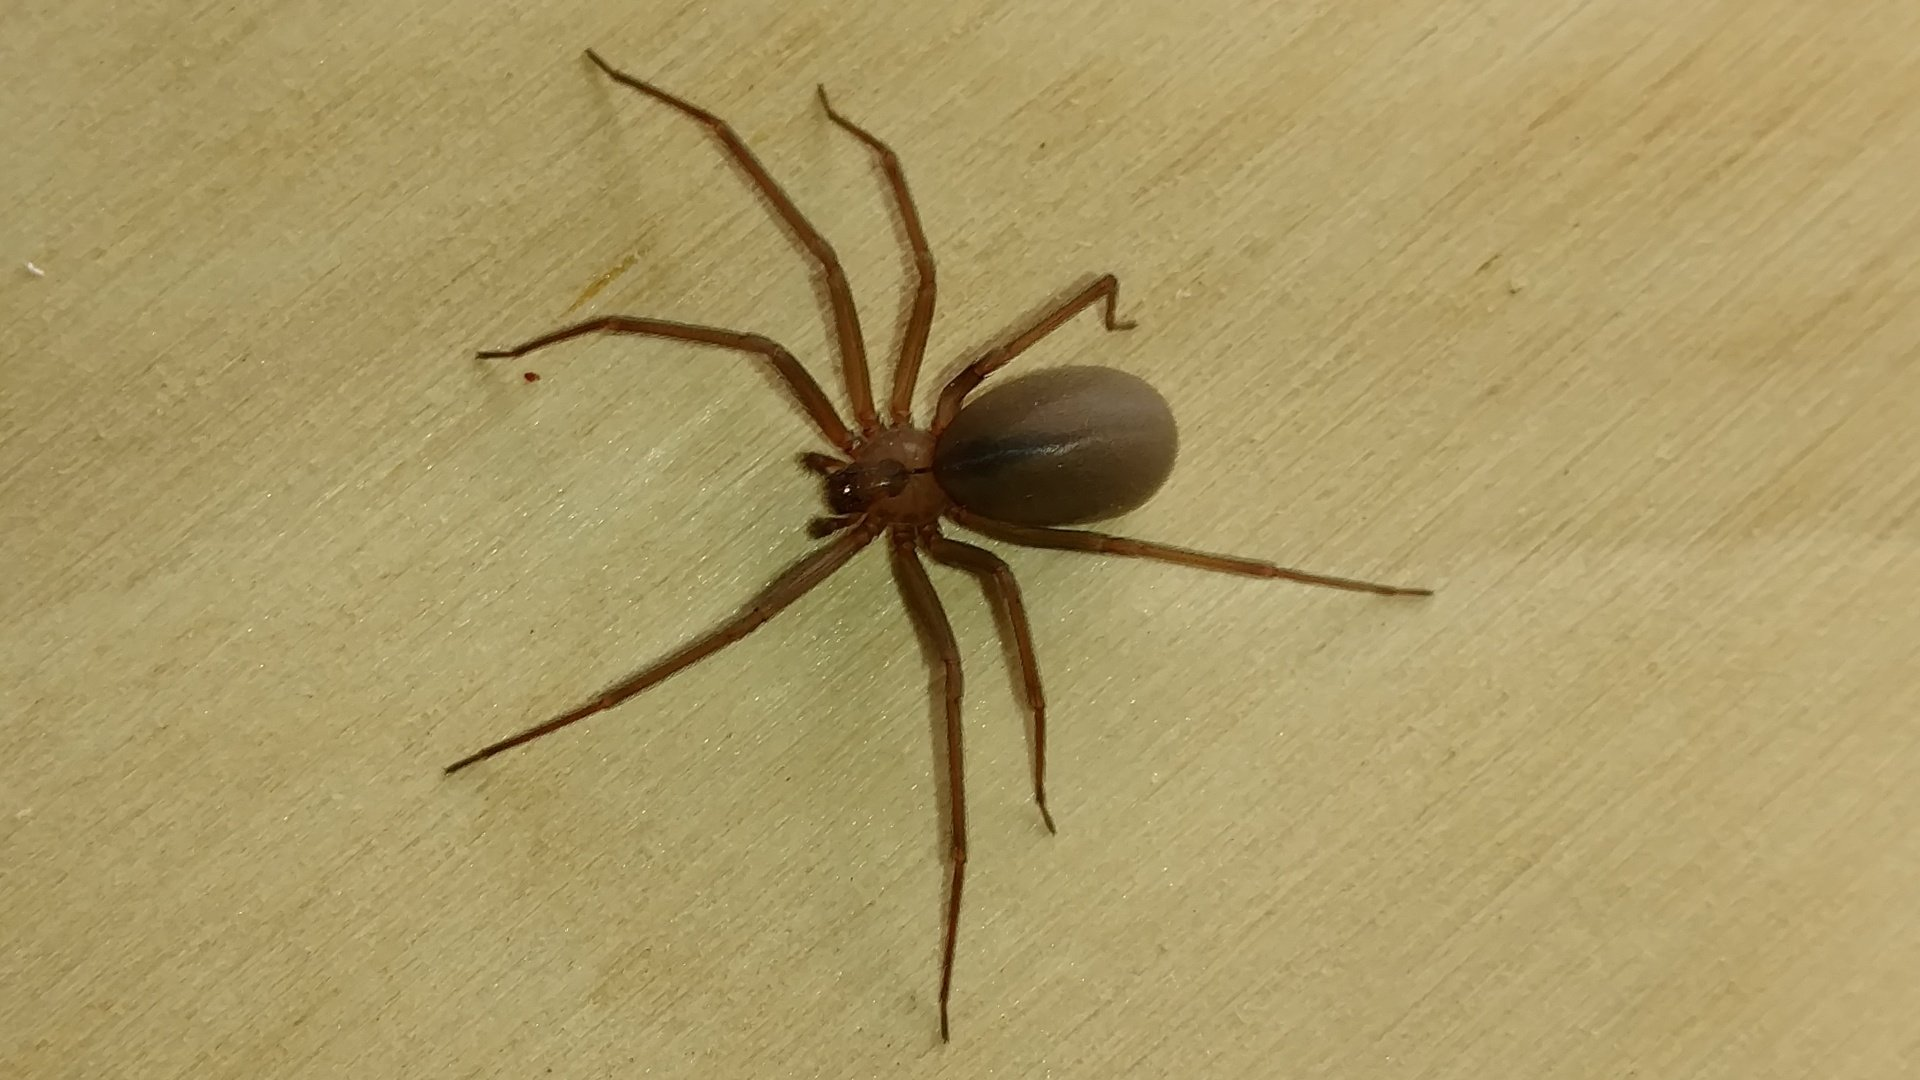 Brown Recluse Spider Specialists